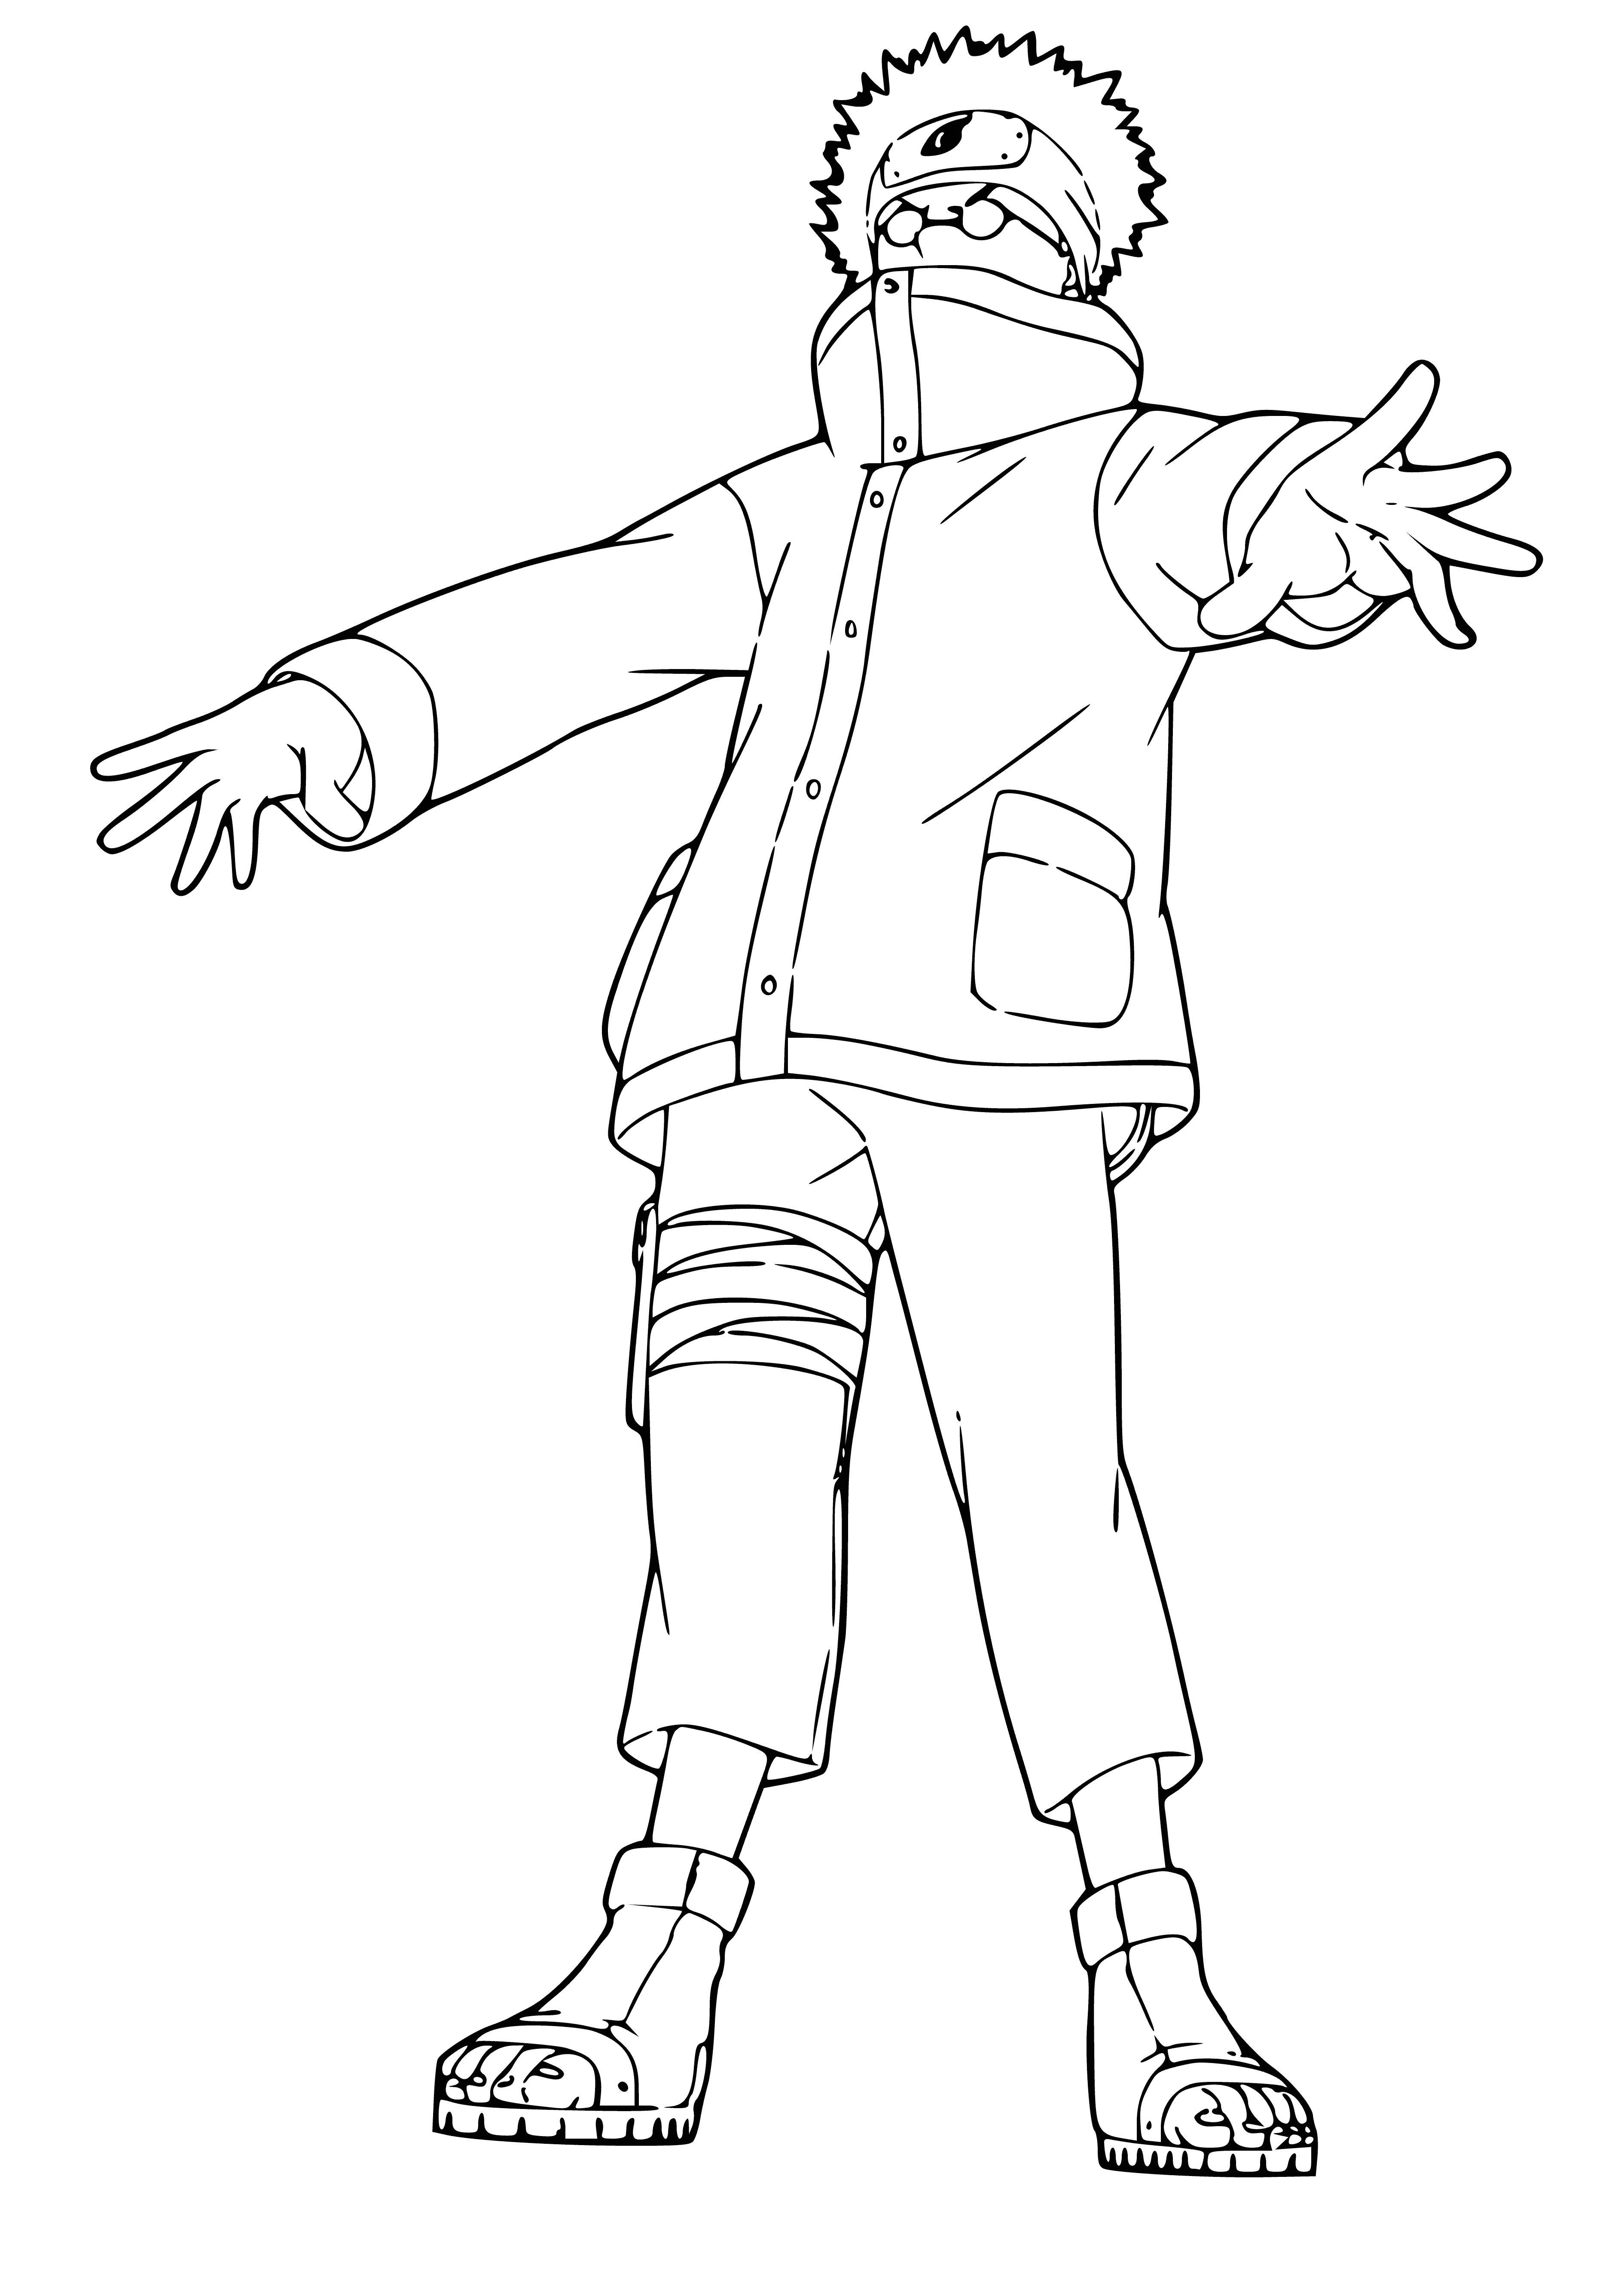 coloring page: Naruto is a young ninja aspiring to be the Hokage; he has an orange jumpsuit, headband, spiral symbol, & tools. His eyes are blue & he has blond spiky hair & a wide grin.